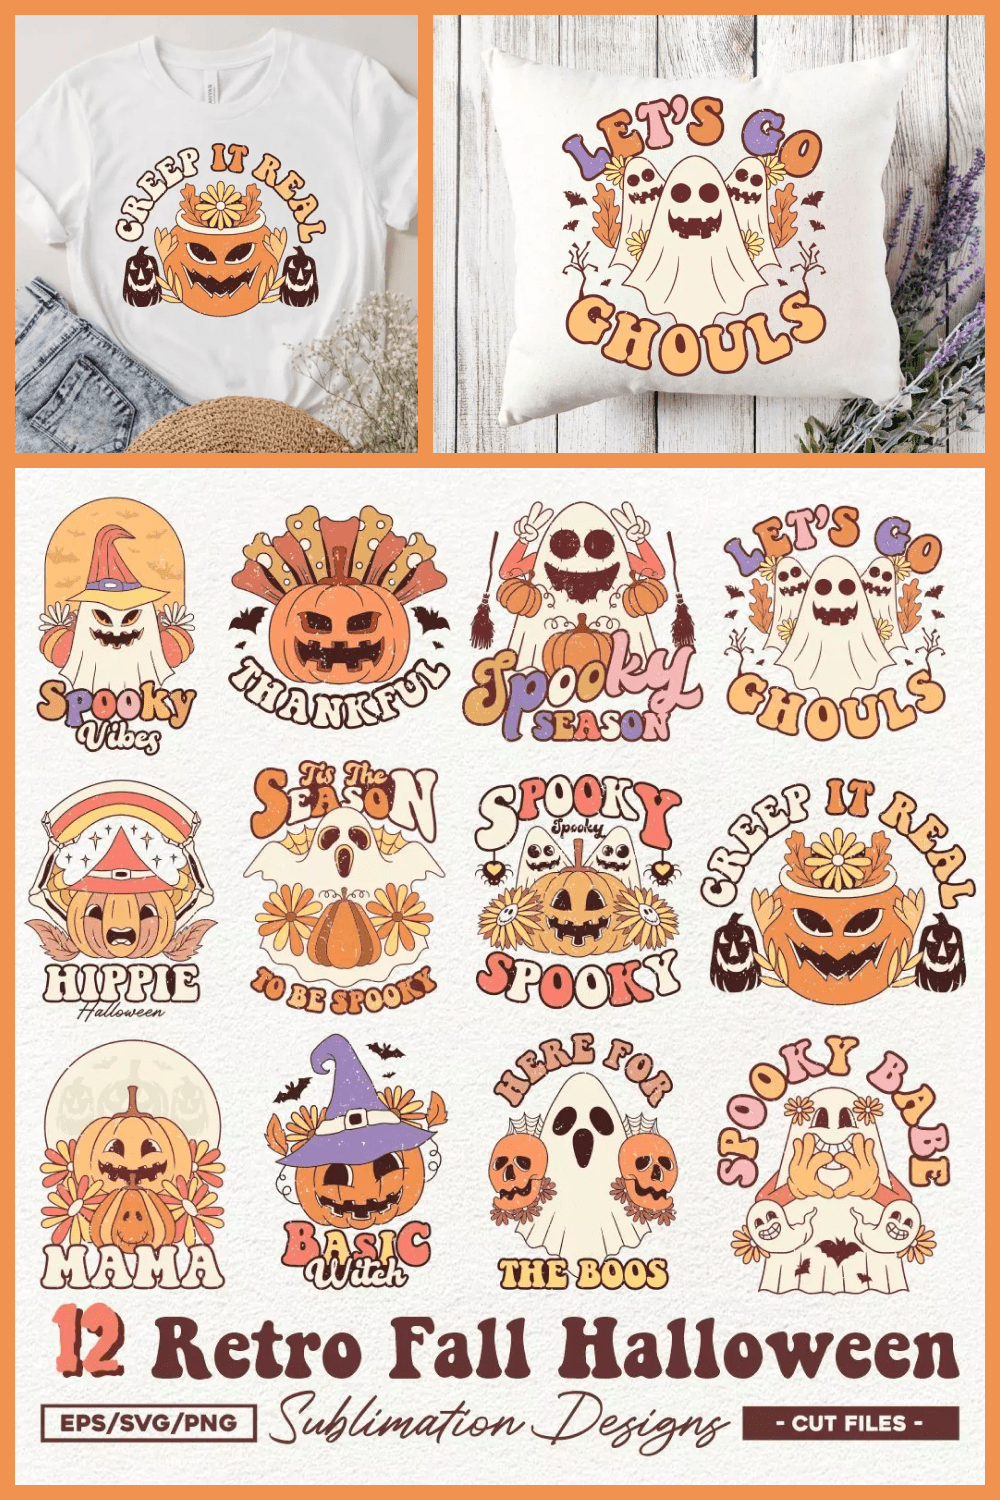 Collage of 12 images of Halloween pumpkins with different inscriptions.